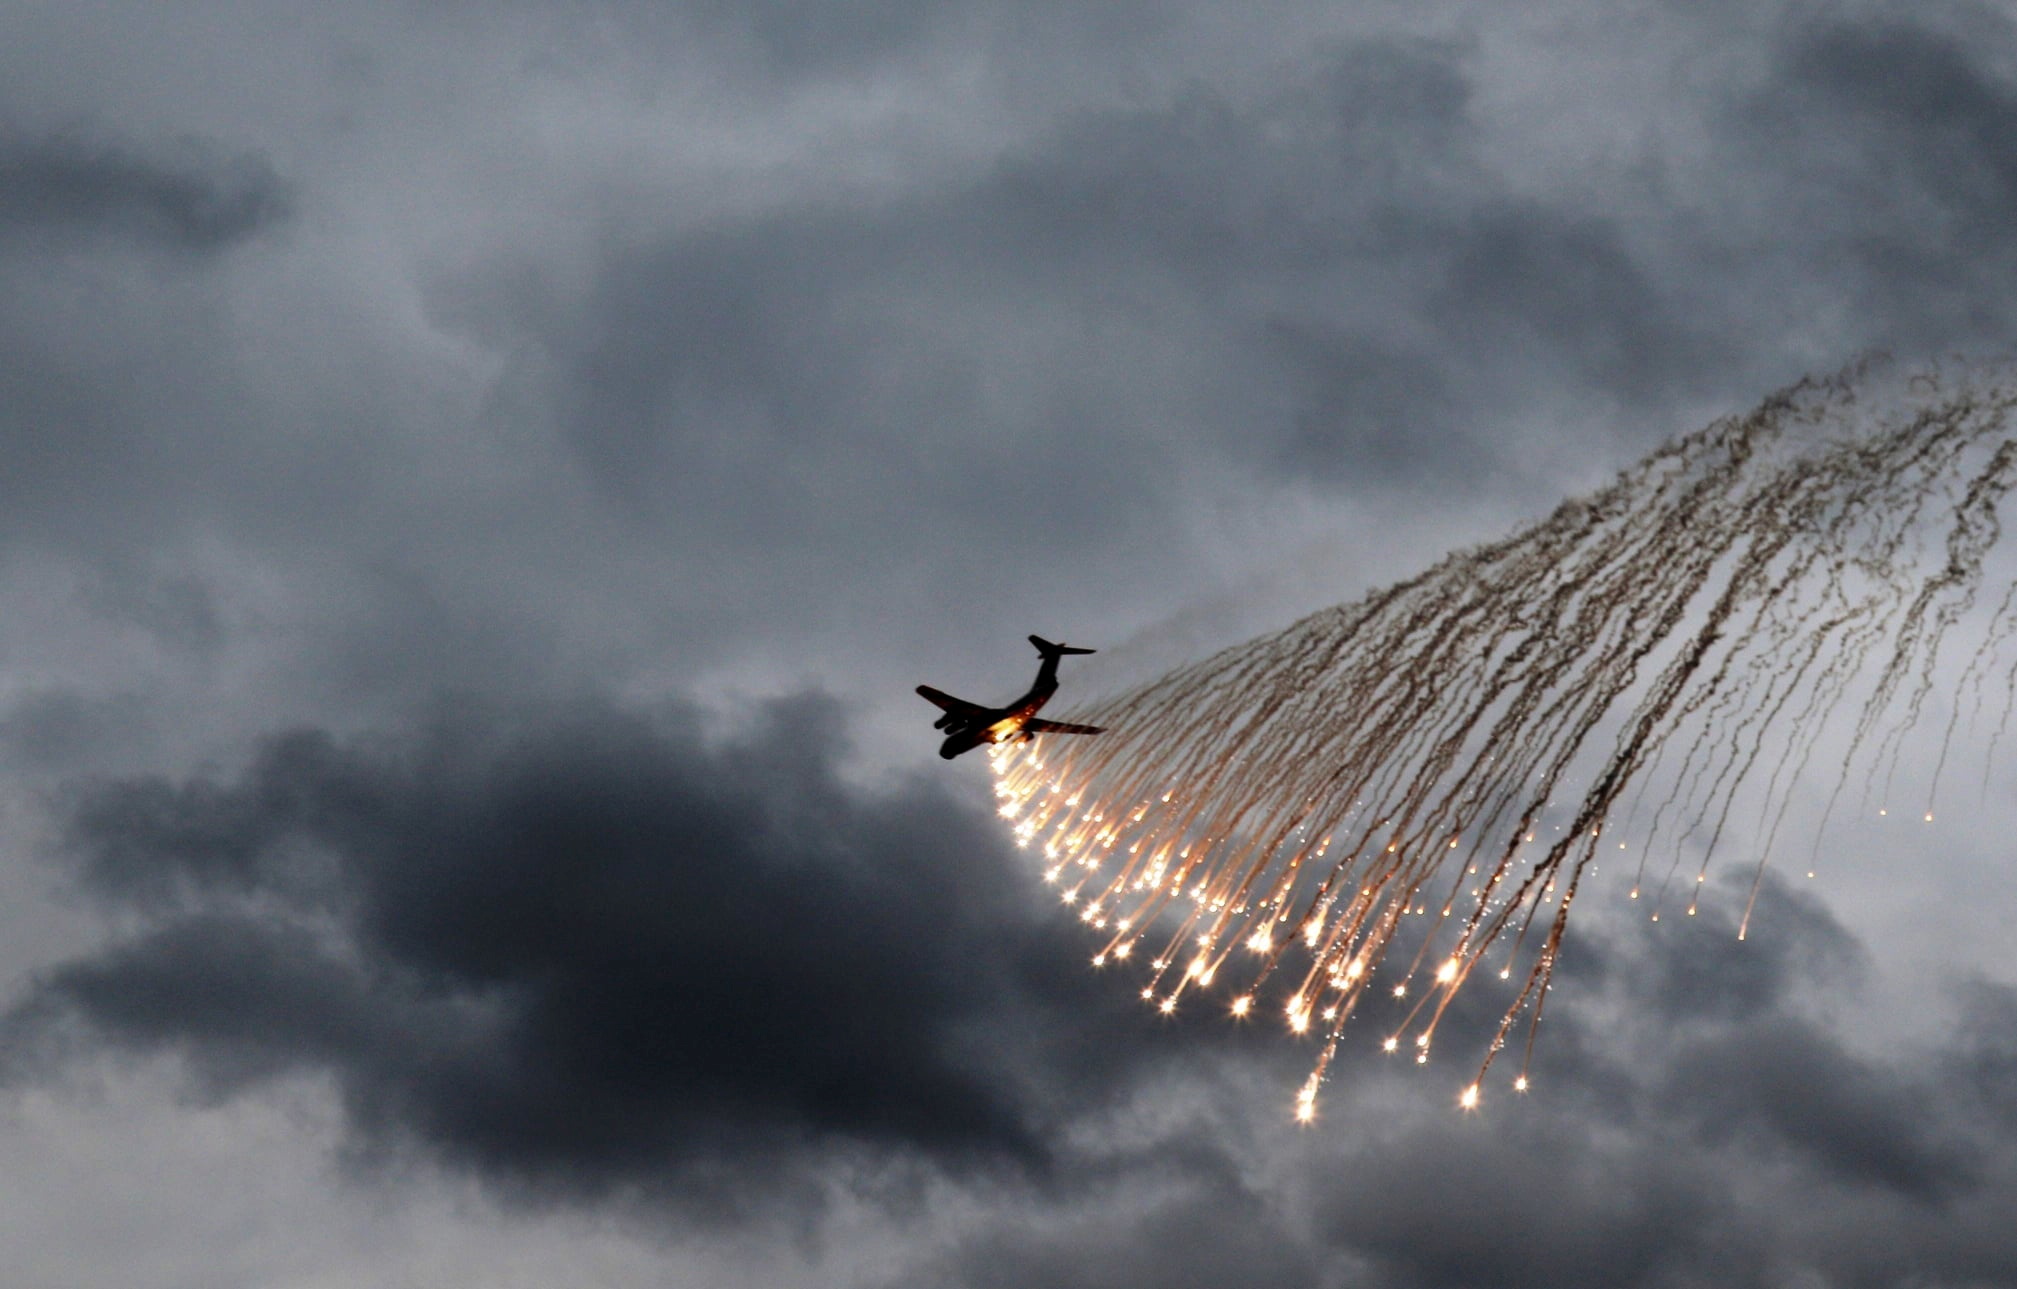 A plane performs a flight during military drills of the Ukrainian Air Assault Forces in Zhytomyr Region, Ukraine November 21, 2021. Press service of the Ukrainian Air Assault Forces Command/Handout via REUTERS